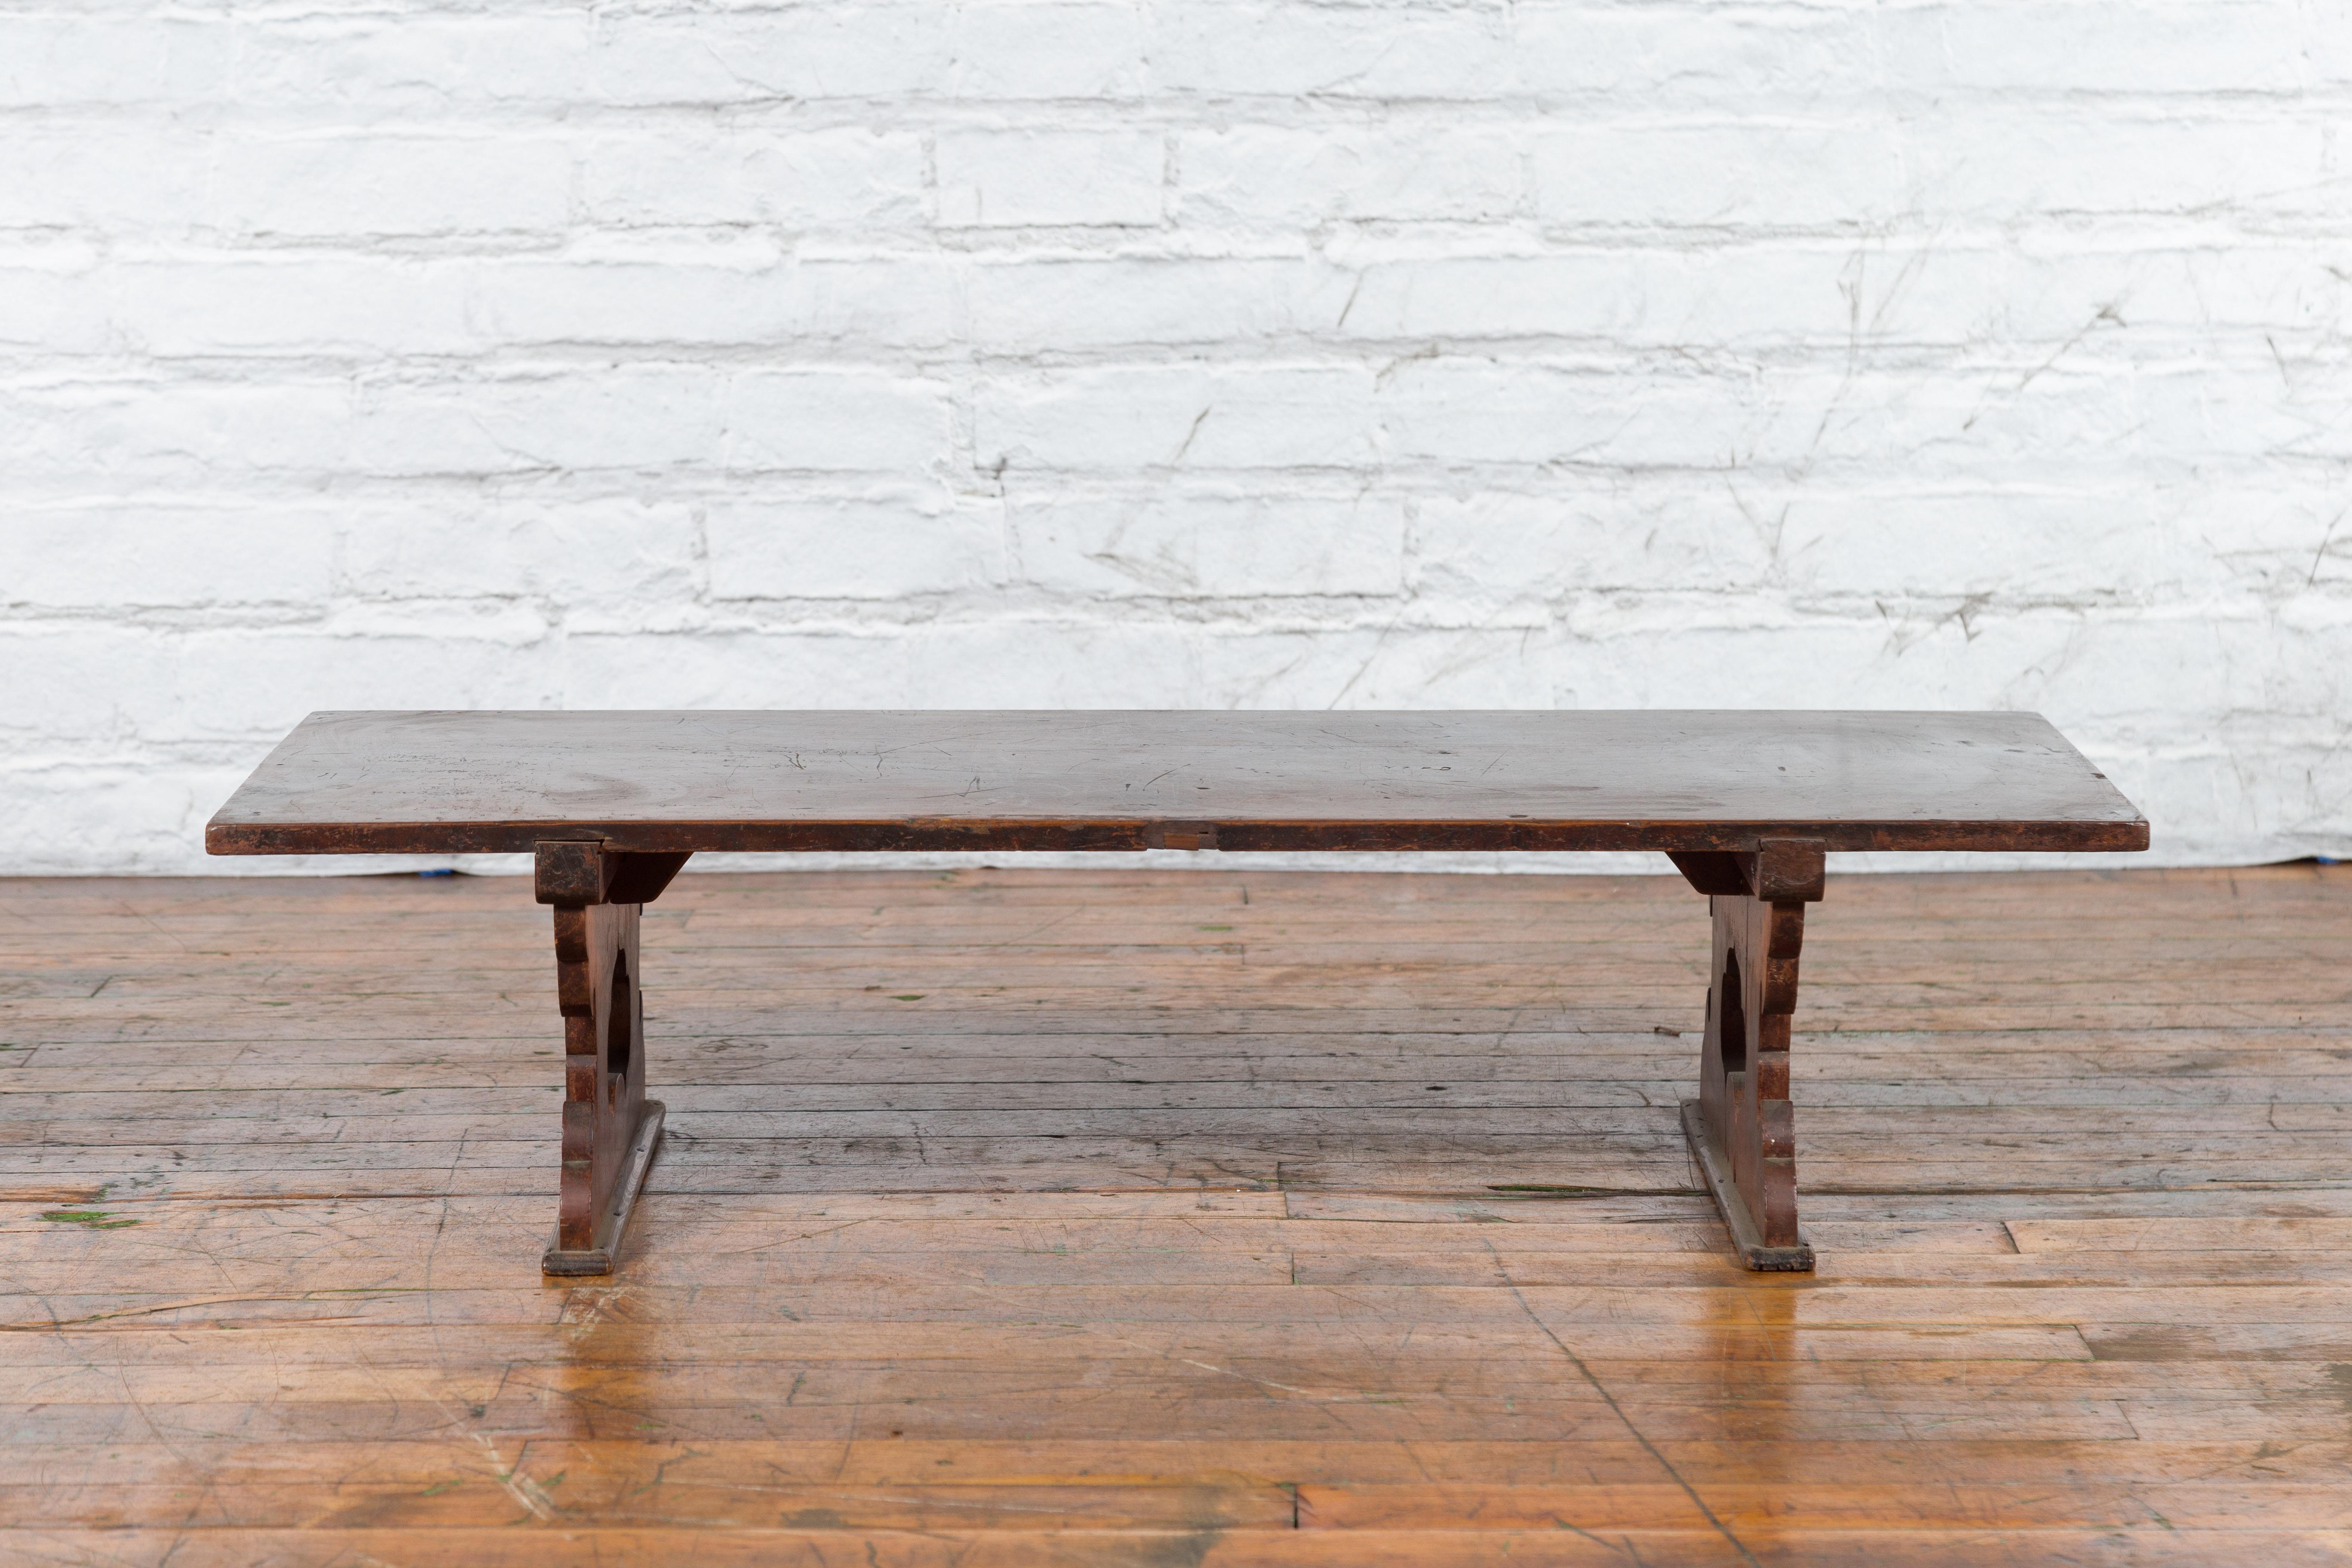 Wood Japanese Meiji Period Low Table with Recessed Legs and Open Carved Cutout Legs For Sale